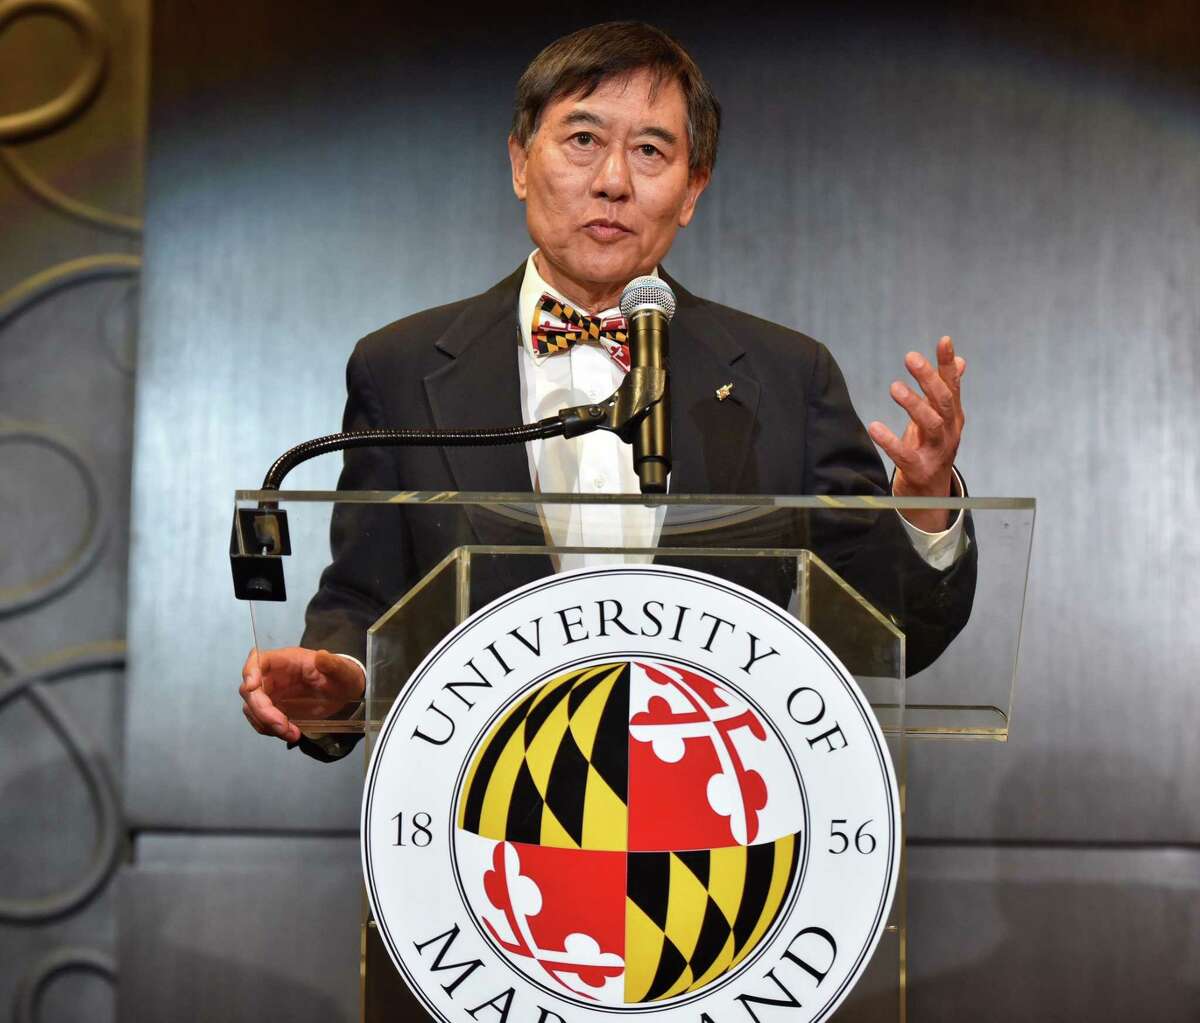 University of Maryland President Wallace Loh holds a news conference in August in the aftermath of a football player's death during practice.